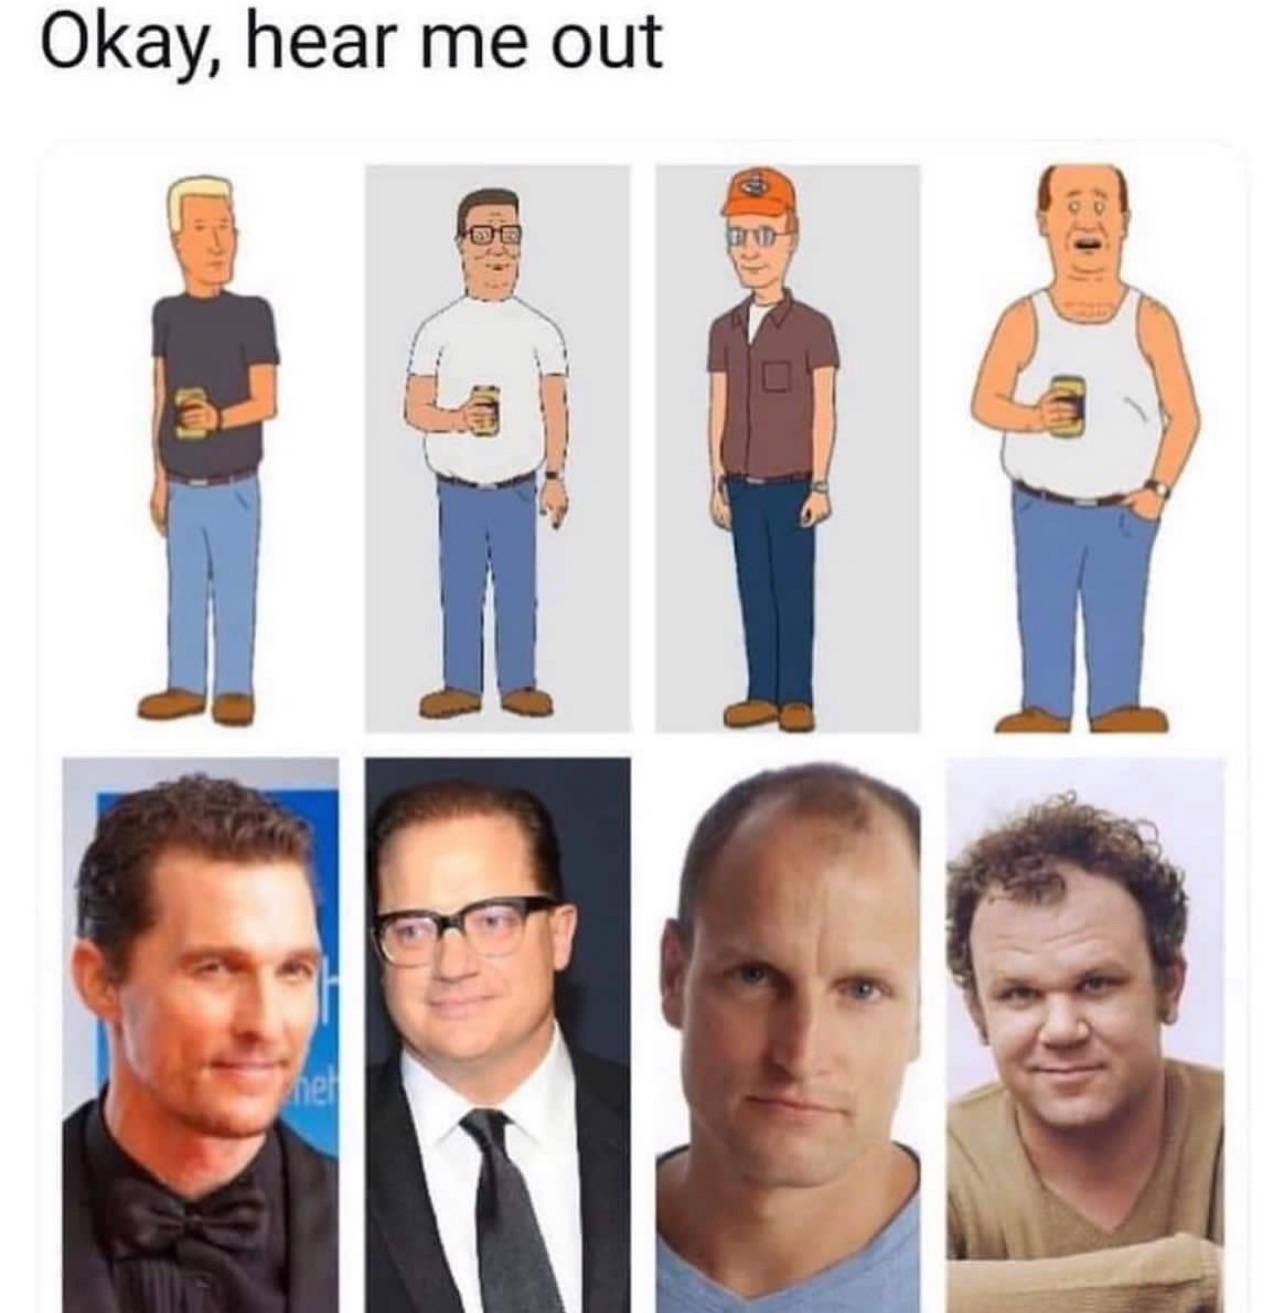 King of the Hill live action, yep